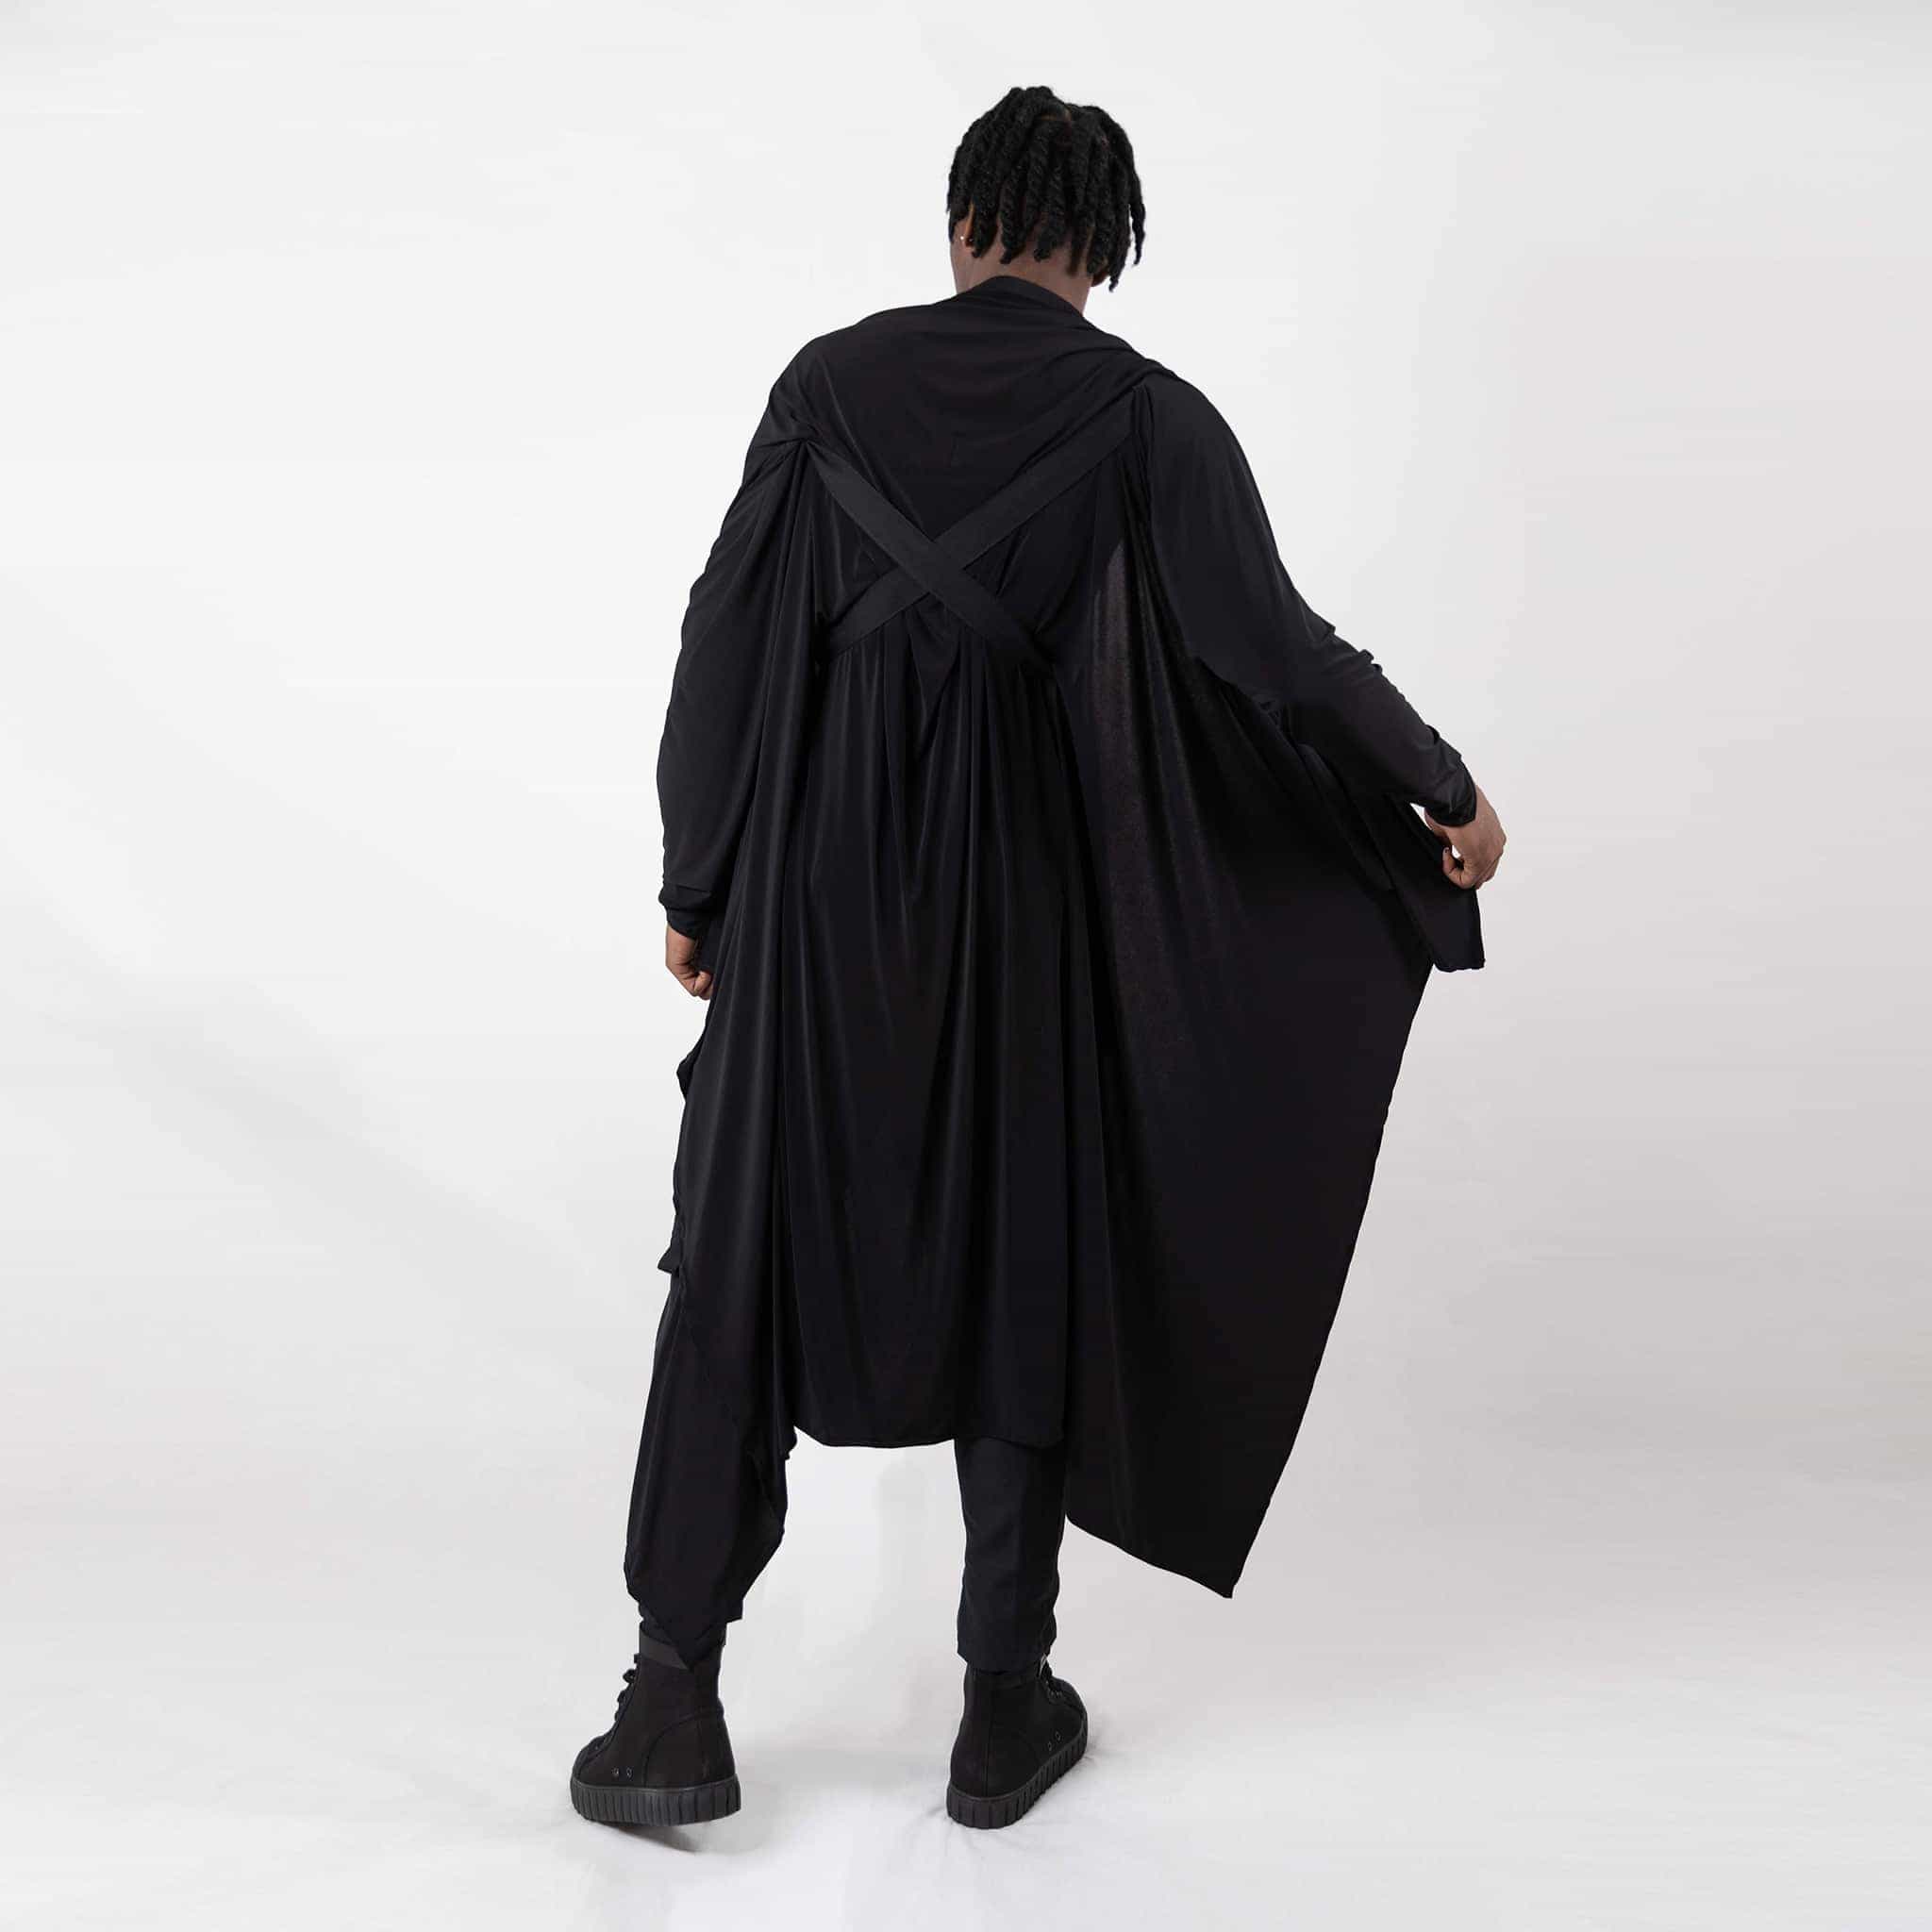   ZERØ London - Back alt. full length view, black long sleeved zero waste cardigan robe with harness and black trousers designed & made in London